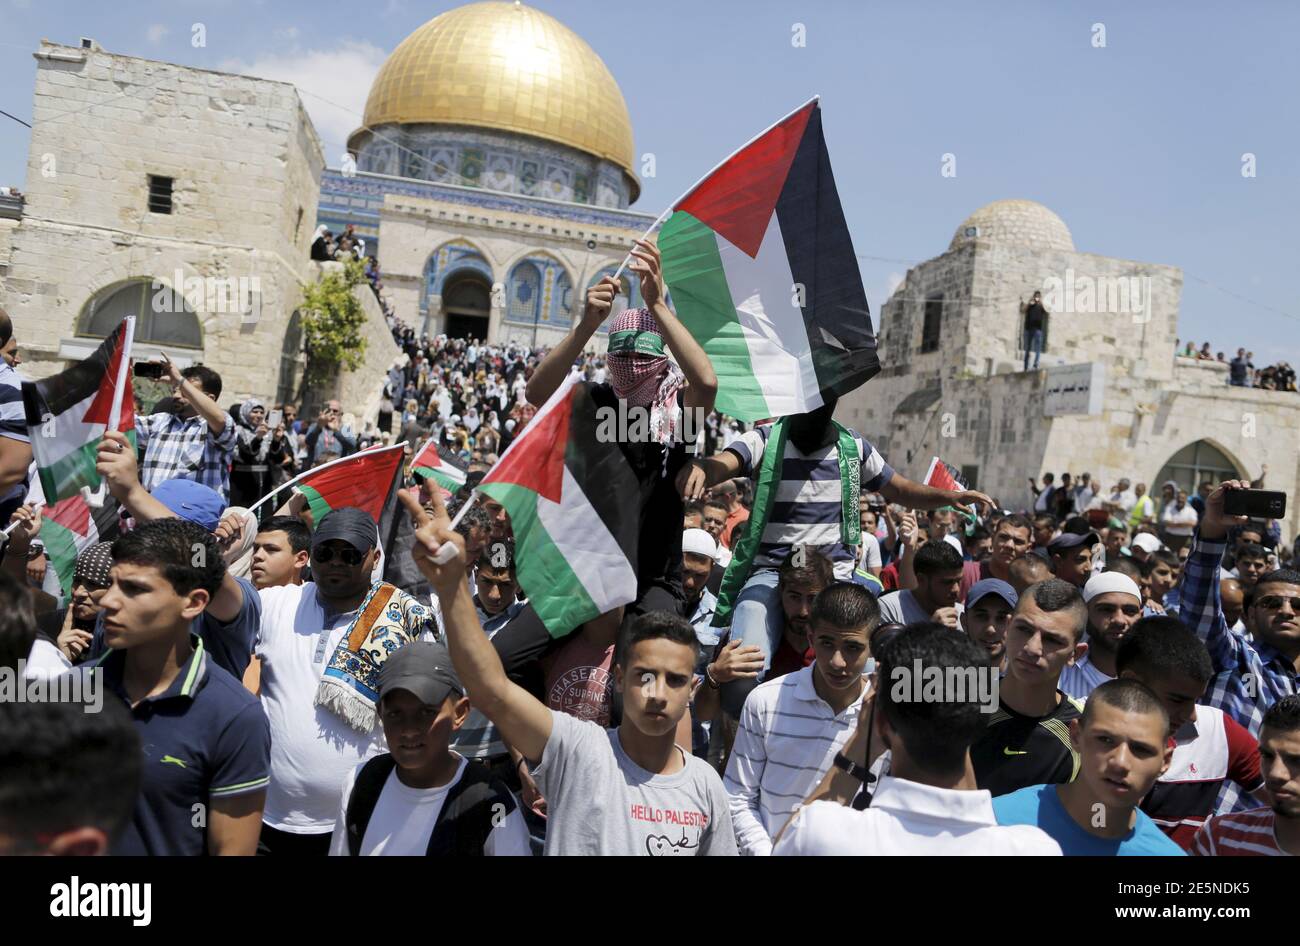 Palestinians wave flags after Friday prayers during a protest to mark Nakba day near the Dome of the Rock on the compound known to Muslims as Noble Sanctuary and to Jews as Temple Mount, in Jerusalem's Old City May 15, 2015. Palestinians mark 'Nakba' (Catastrophe) on May 15 to commemorate the expulsion or fleeing of some 700,000 Palestinians from their homes in the war that led to the founding of Israel in 1948. REUTERS/Ammar Awad Stock Photo